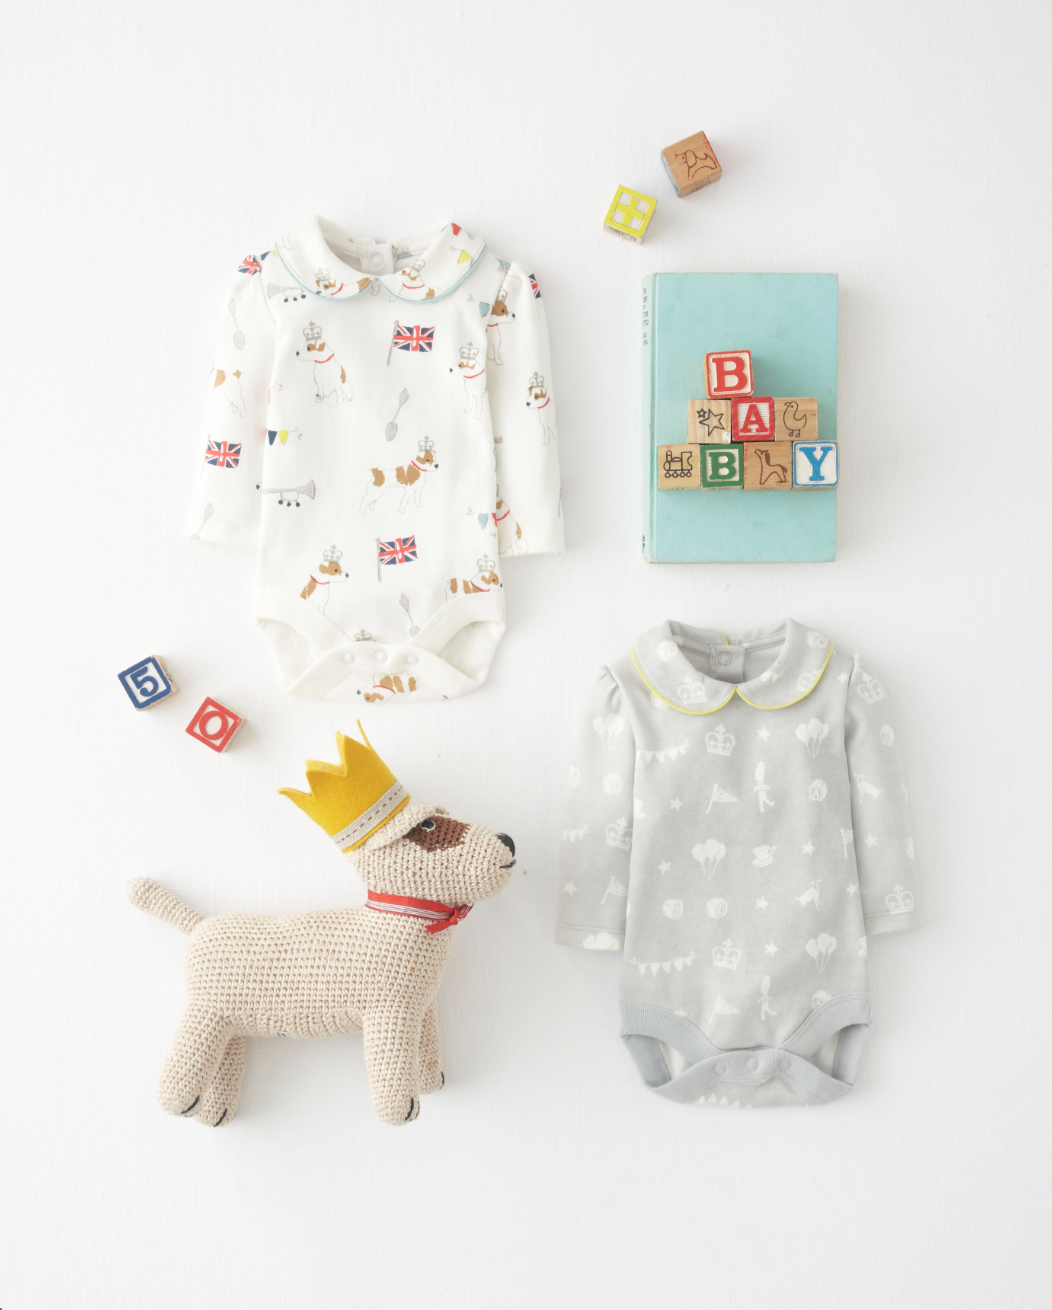 mamasVIB | V. I. BABY: Stylish ways to celebrate the arrival of the Royal Baby  | royal baby | royal | duke and duchess of cmabridge | kate middleton | prince george | new baby | royal baby | marsk and spencer | limited edition biscuit tin | miff and the royal baby | joules royal baby clothes | children salon | new royal birth | george | baby boy | baby girl | princess | kate | willima | prince william | pregnancy | royal news | stylish buys | shopping | mamasVIB | boden | boden royal bodysuits | boden baby